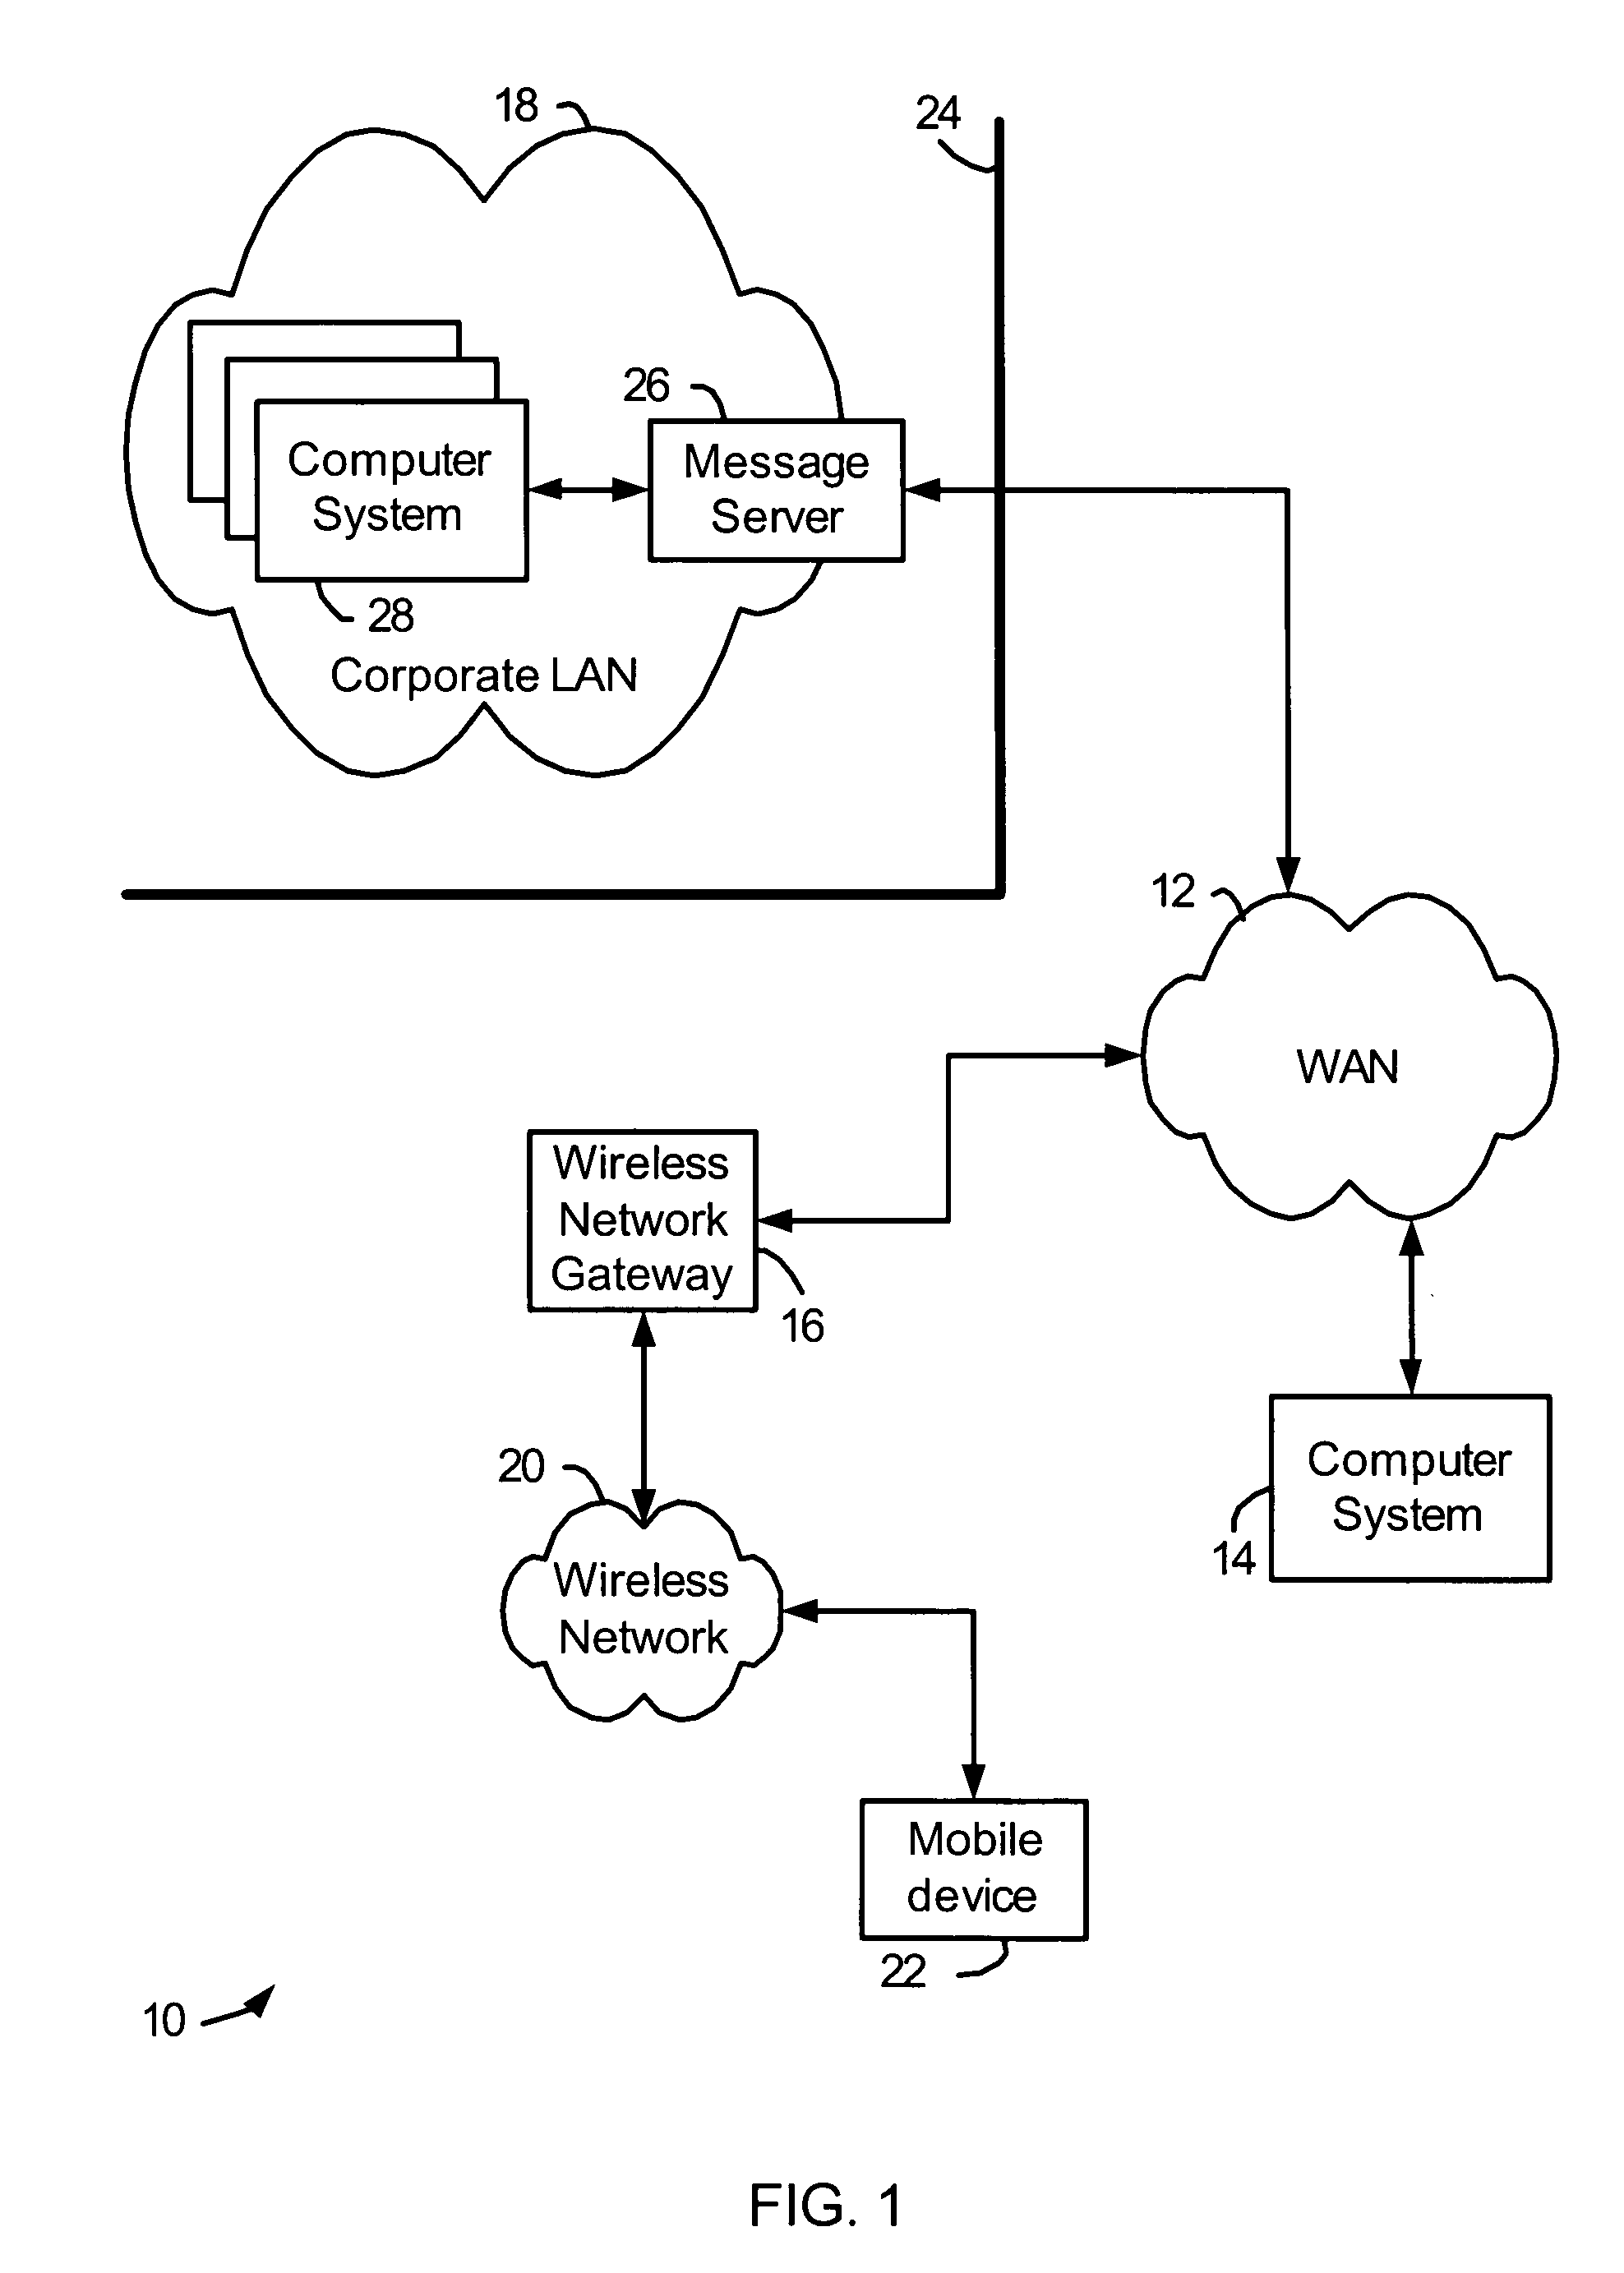 System and method of accessing keys for secure messaging